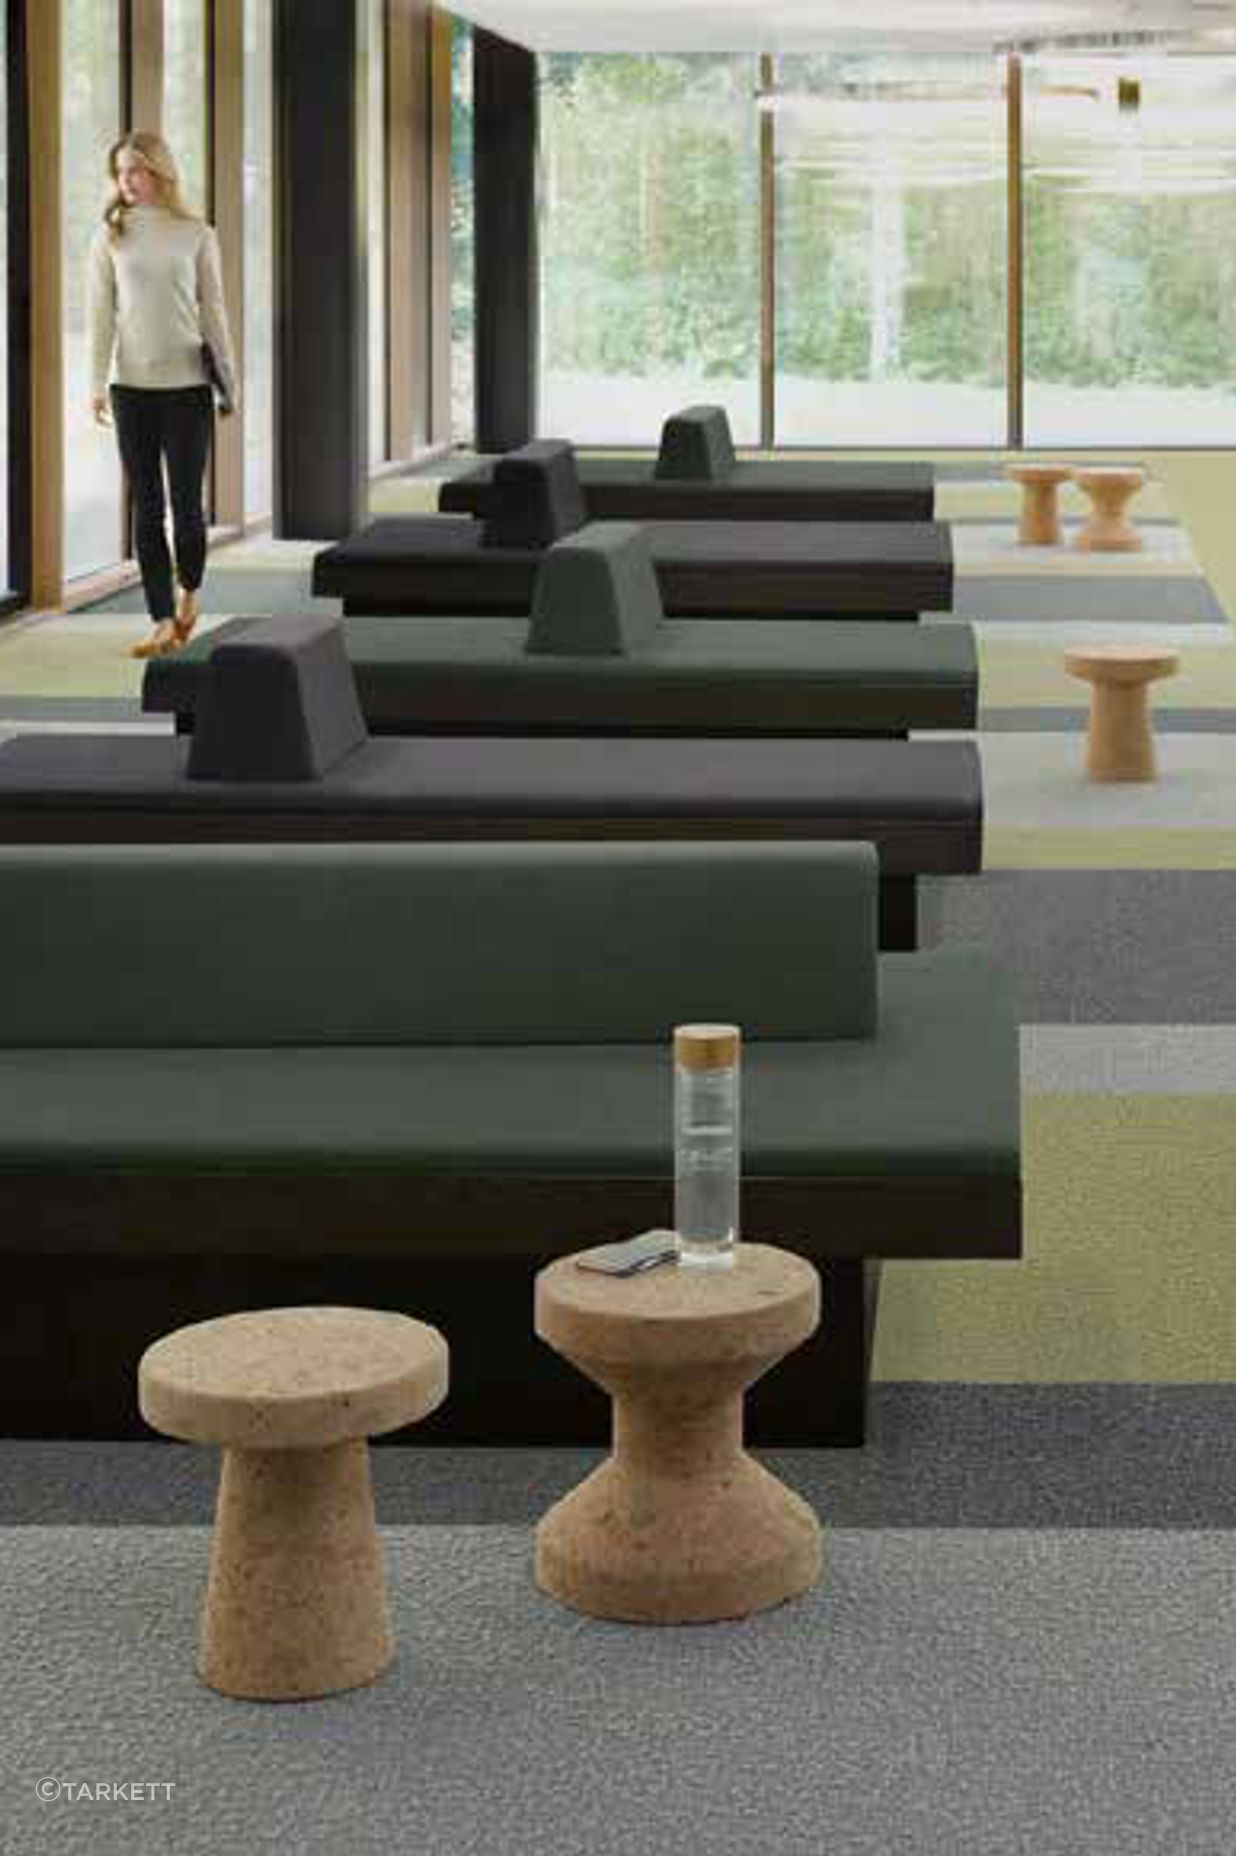 Improving Workplace Health &amp; Wellbeing through effective design